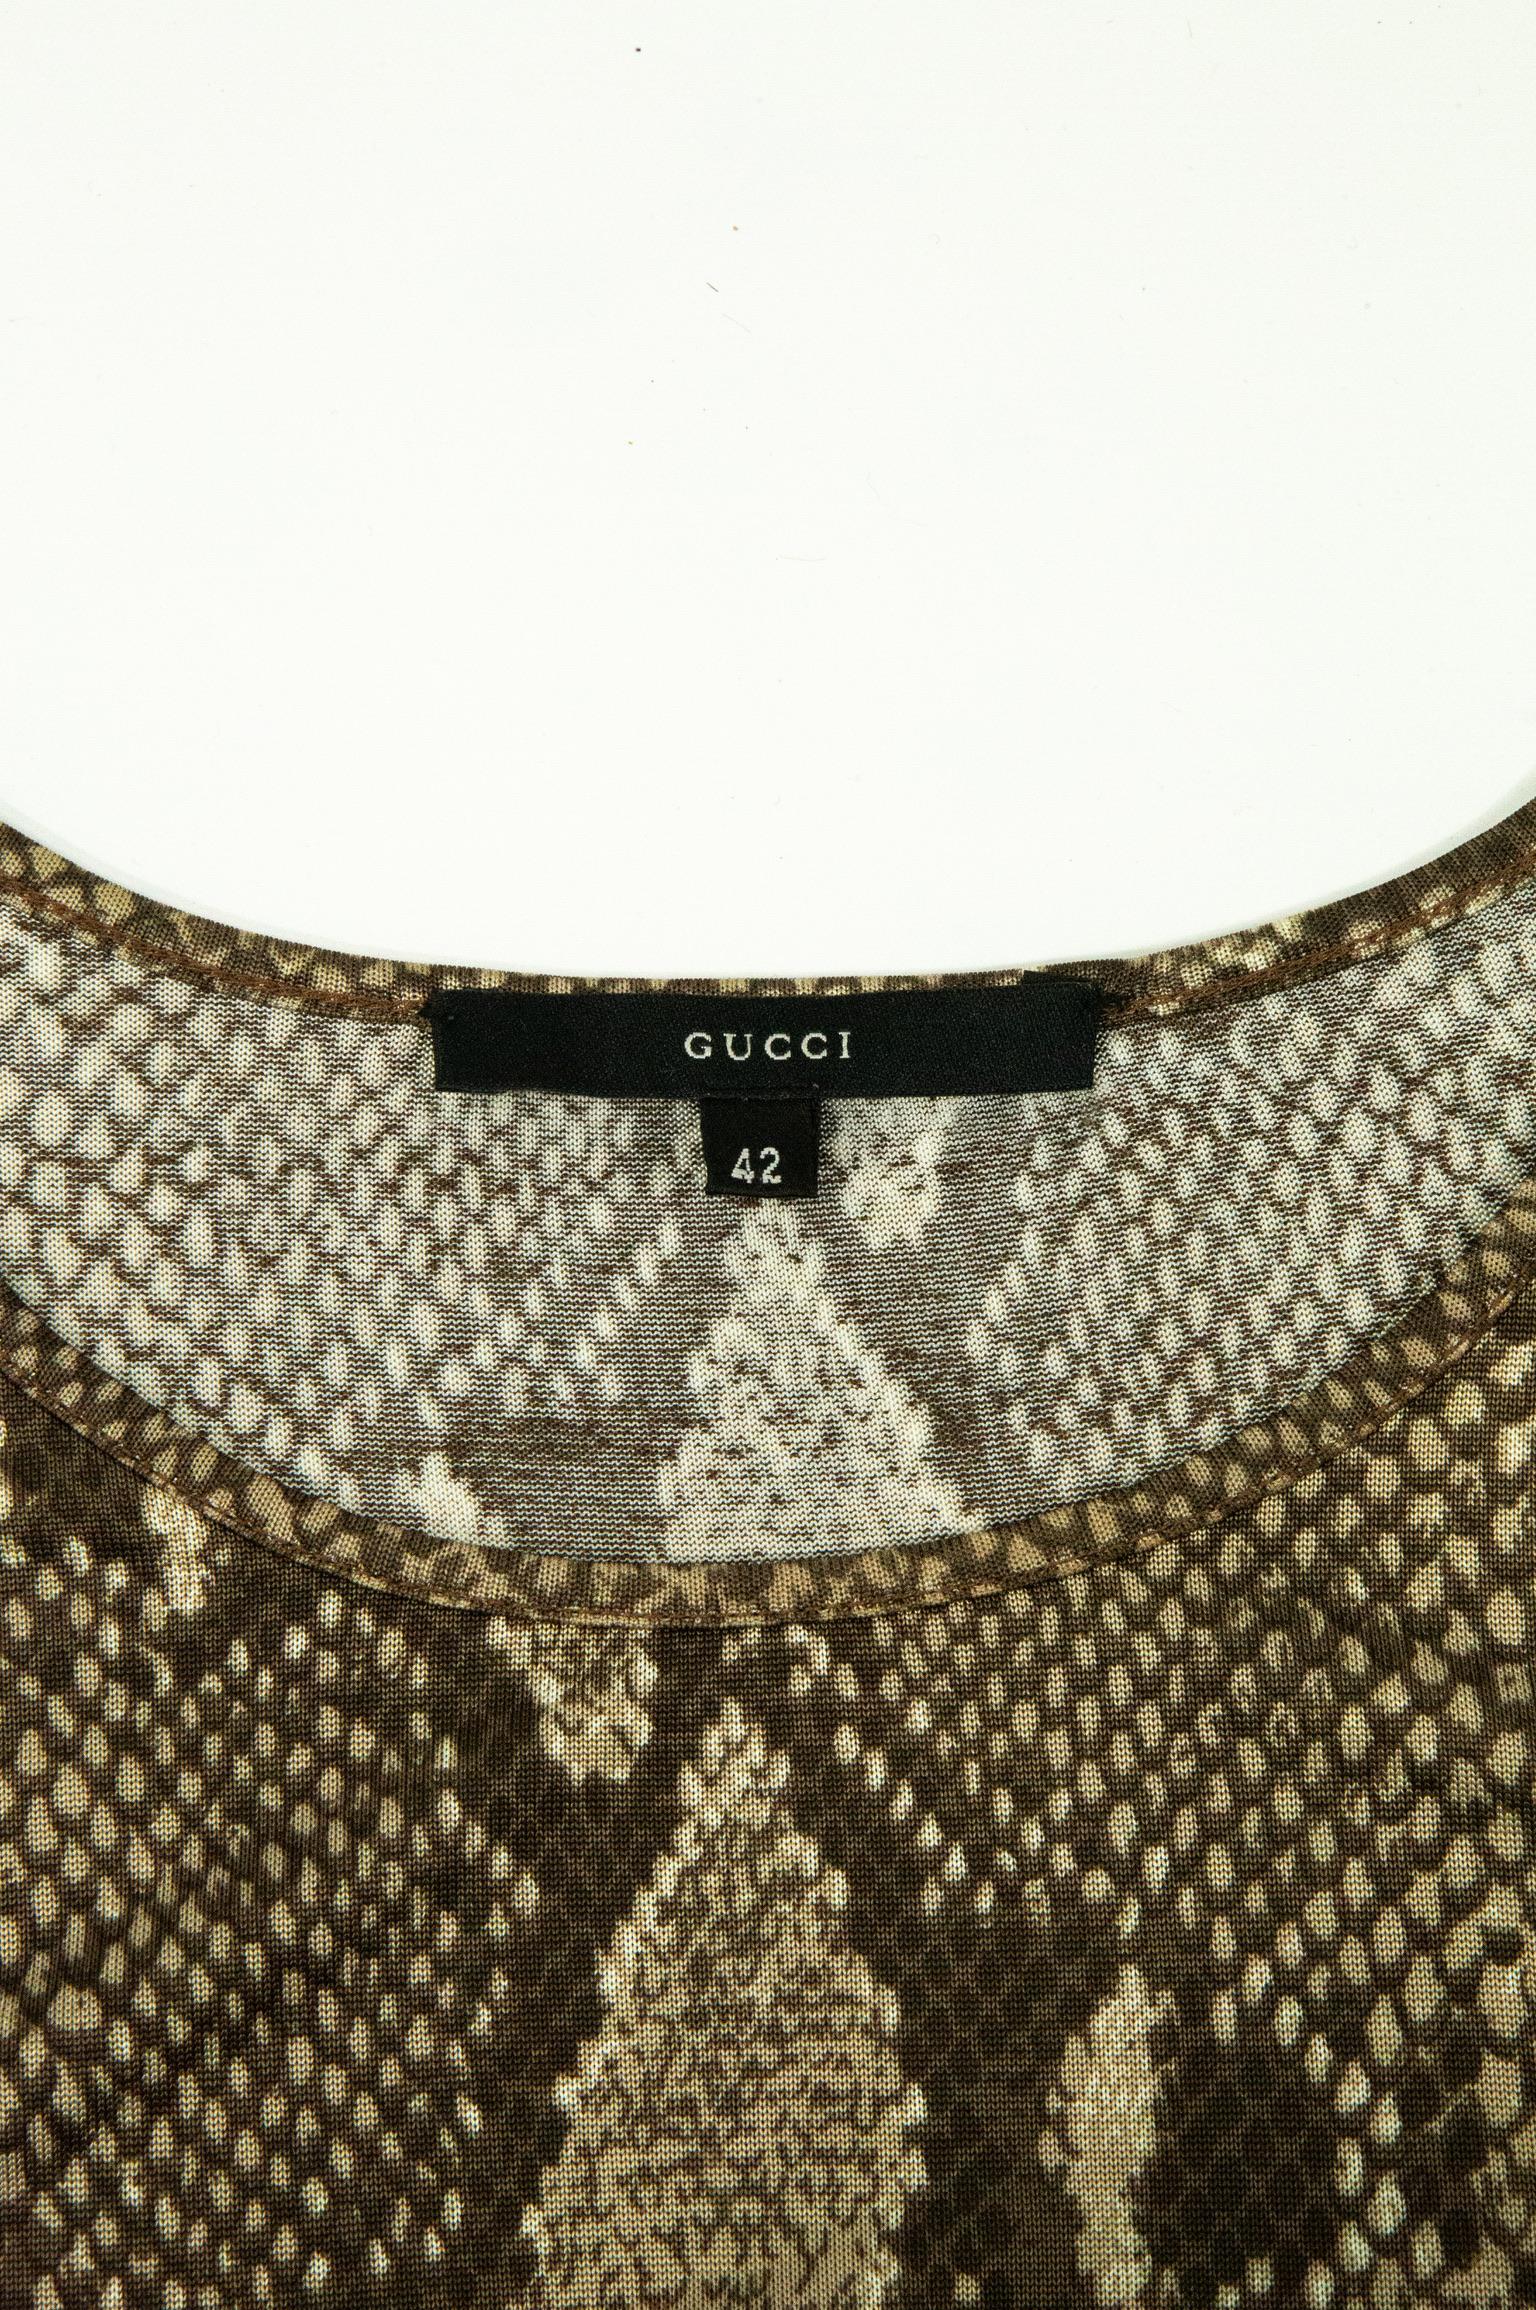  Tom Ford For Gucci SS 2000 Snakeskin Jersey T-Shirt In Good Condition For Sale In London, GB